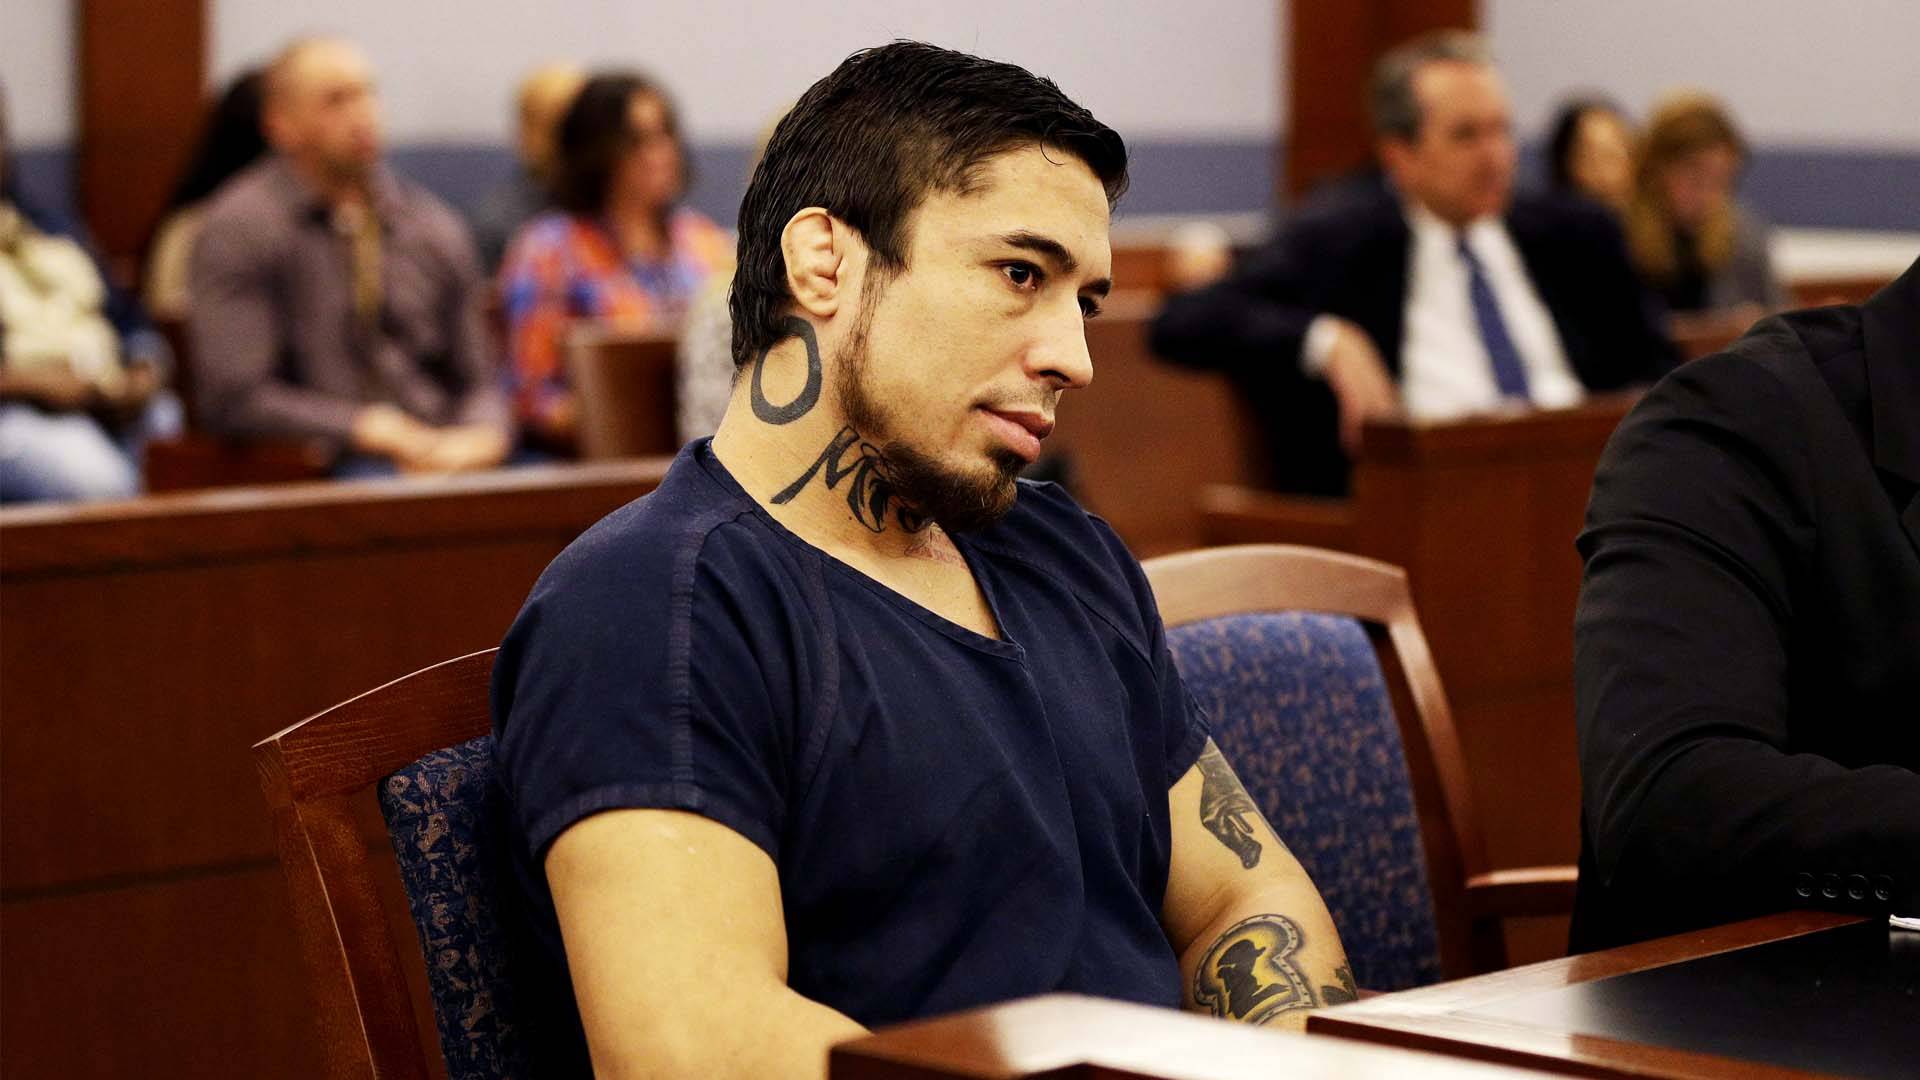 Mma Star War Machine Sentenced With 36 Years To Life In Prison For Brutally Assaulting Ex 